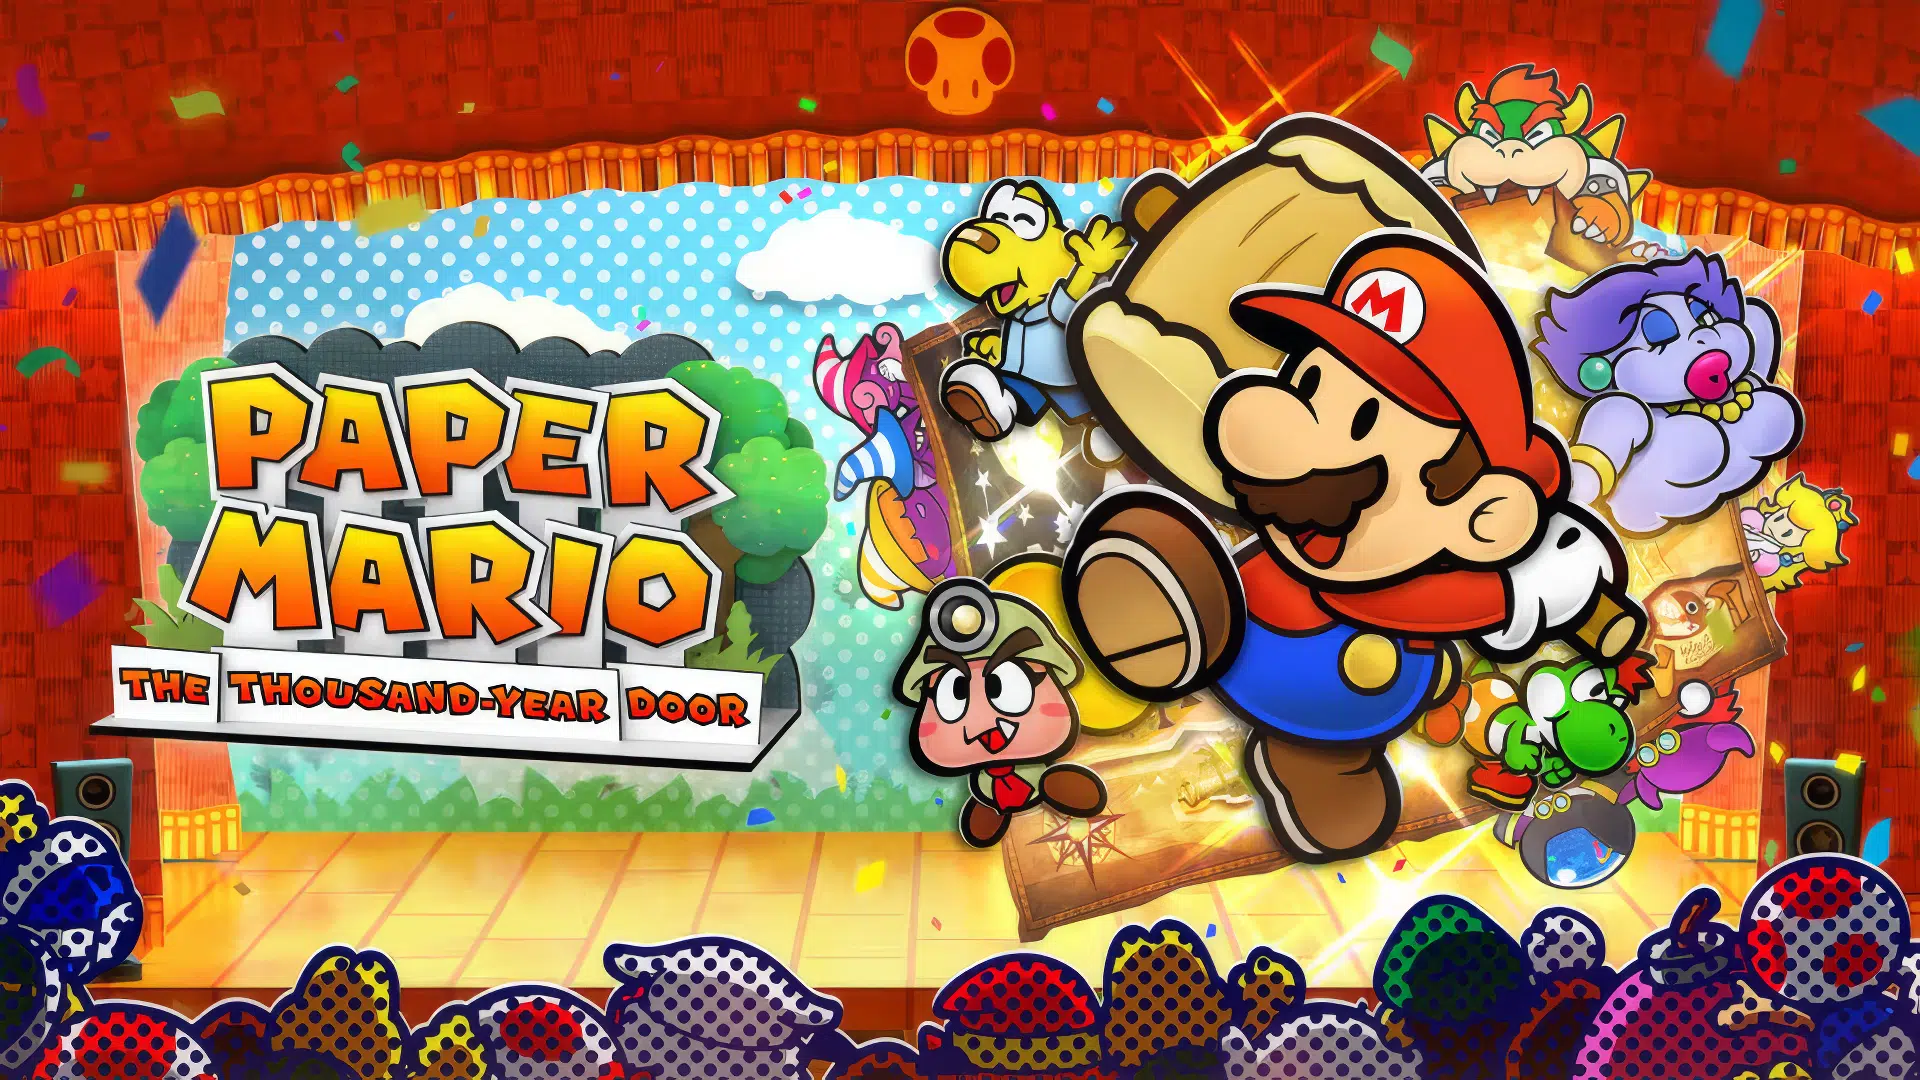 Rediscovering “Paper Mario: The Thousand-Year Door” Through Streaming